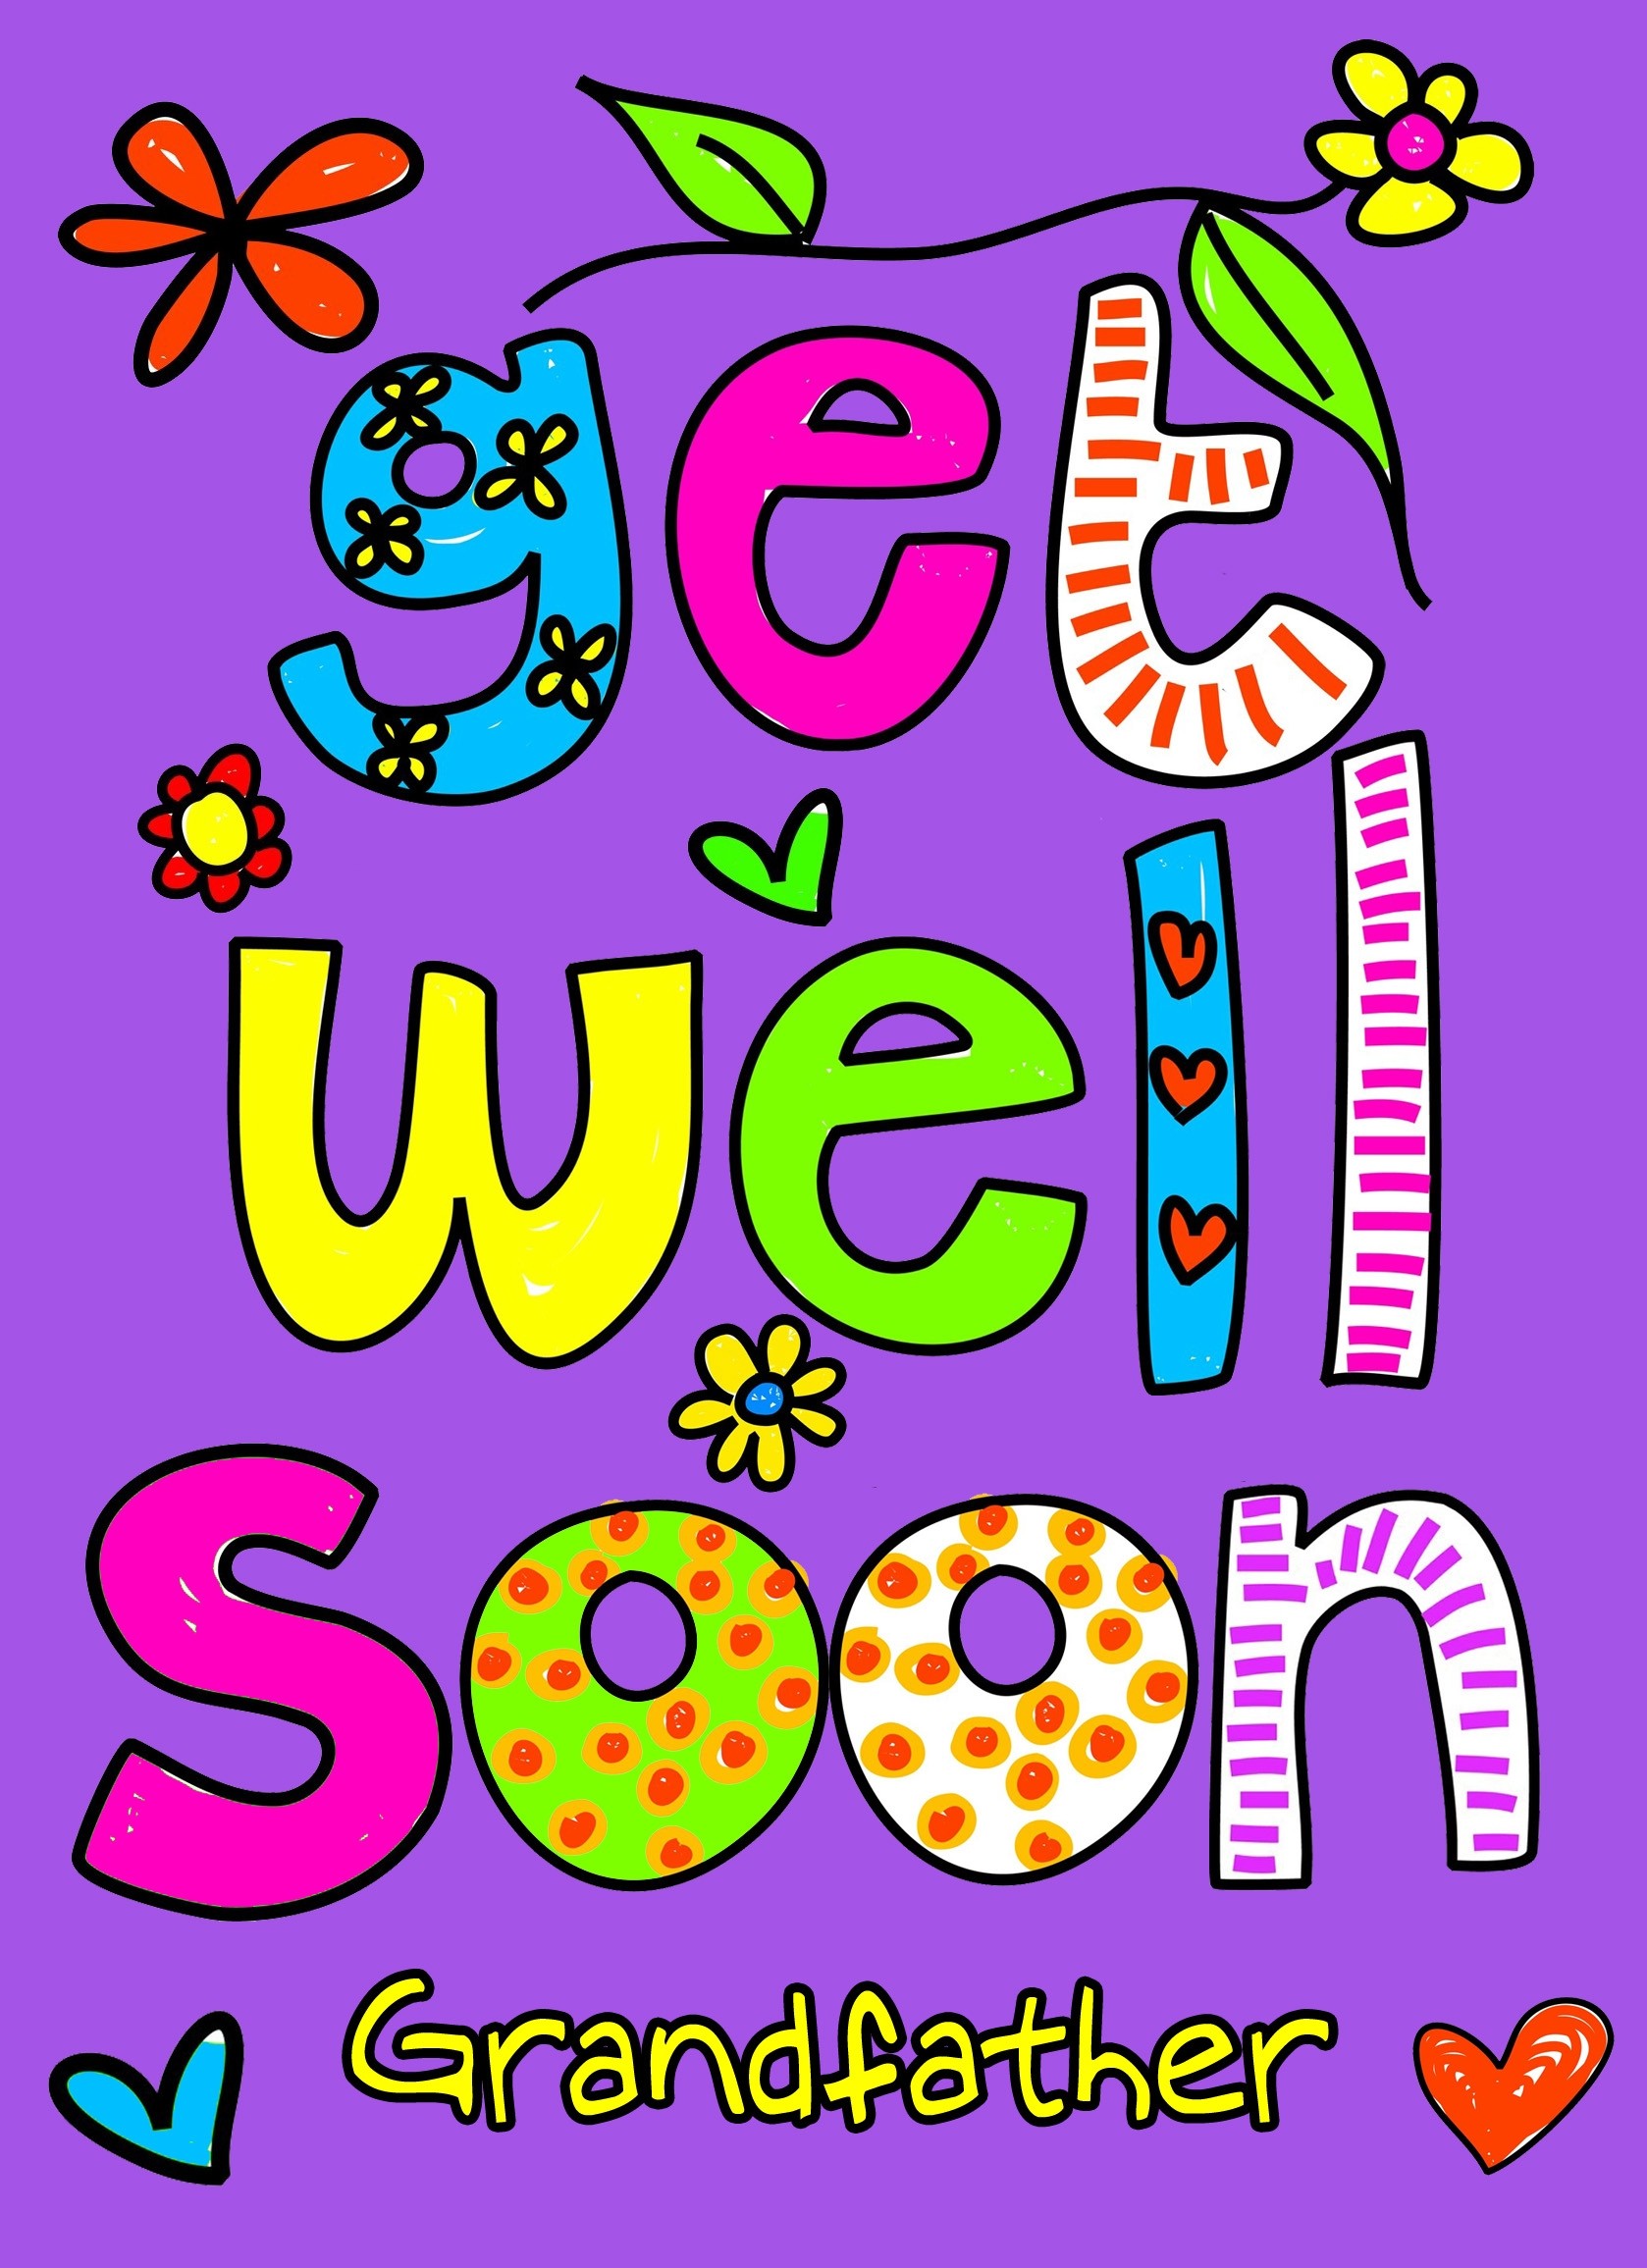 Get Well Soon 'Grandfather' Greeting Card